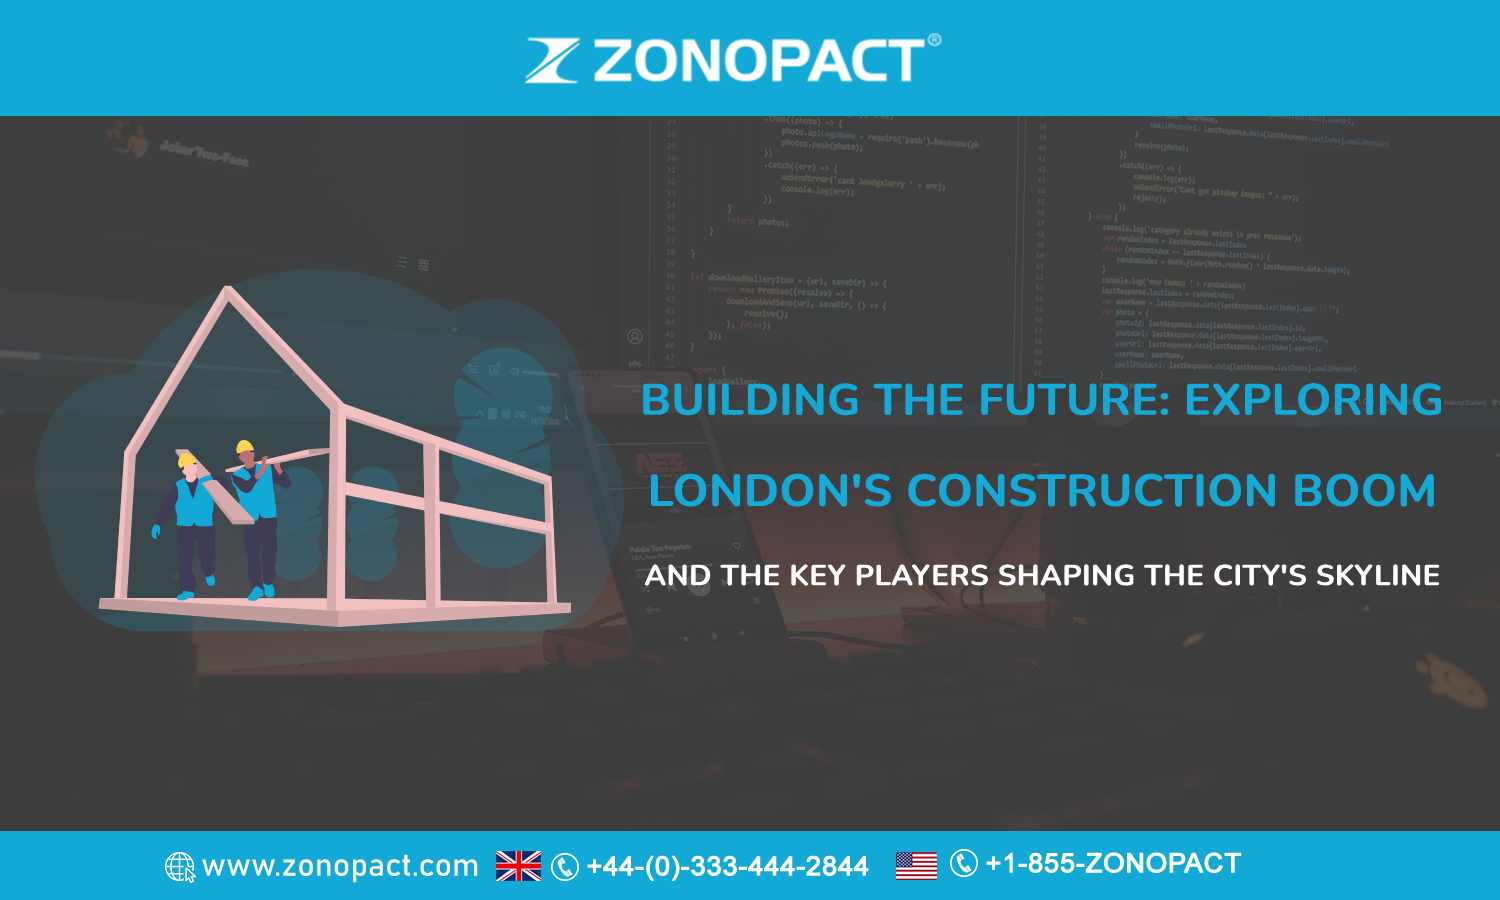 Building the Future Exploring London's Construction Boom and the Key Players Shaping the City's Skyline